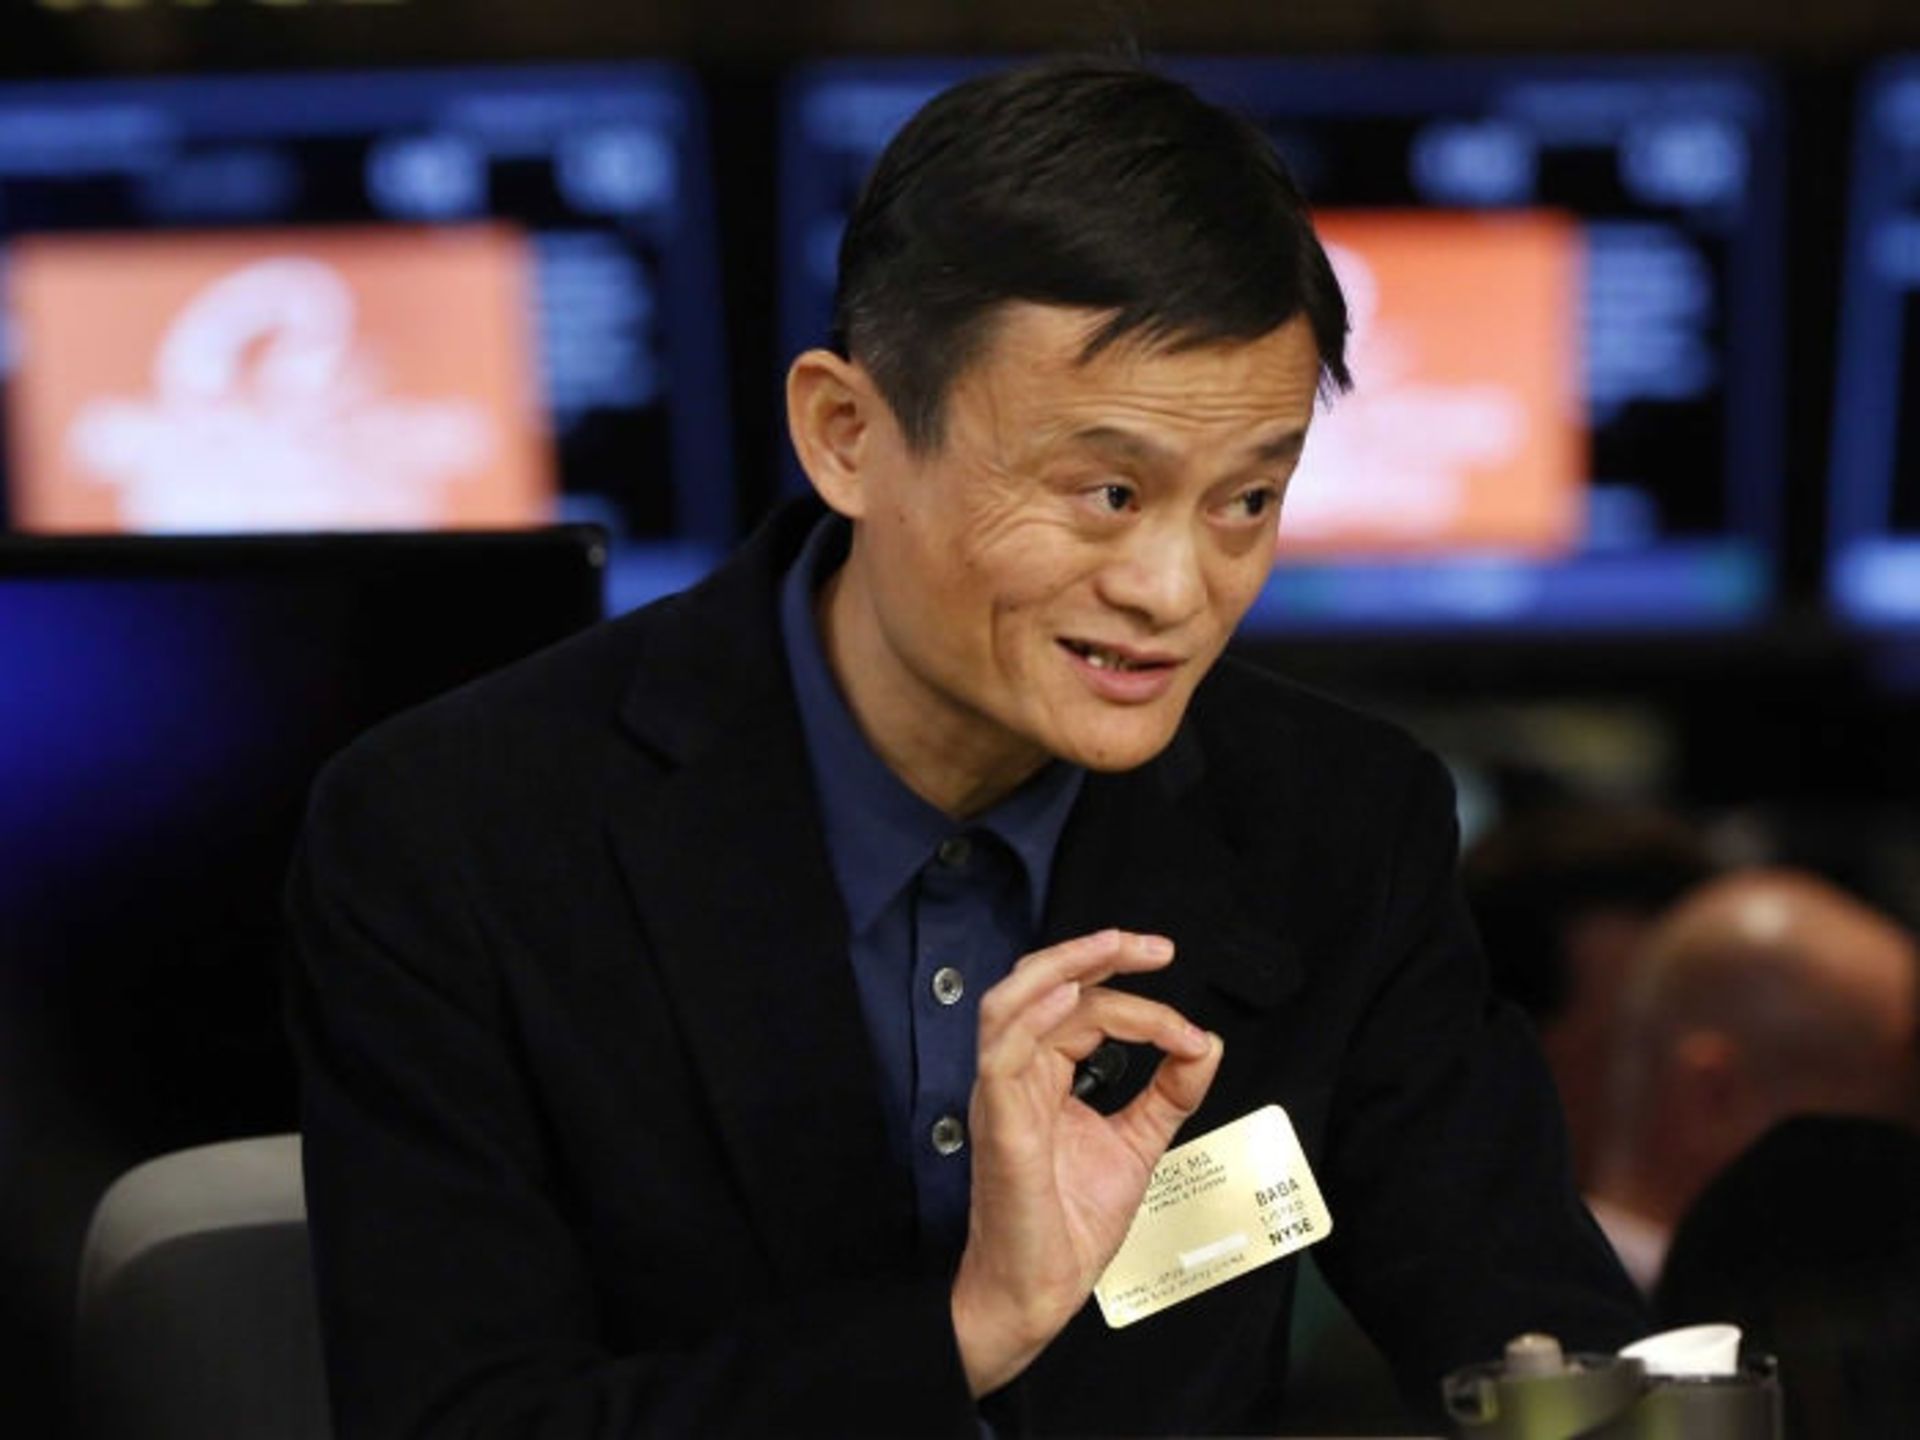 7-jack-ma-is-the-founder-and-chairman-of-alibaba